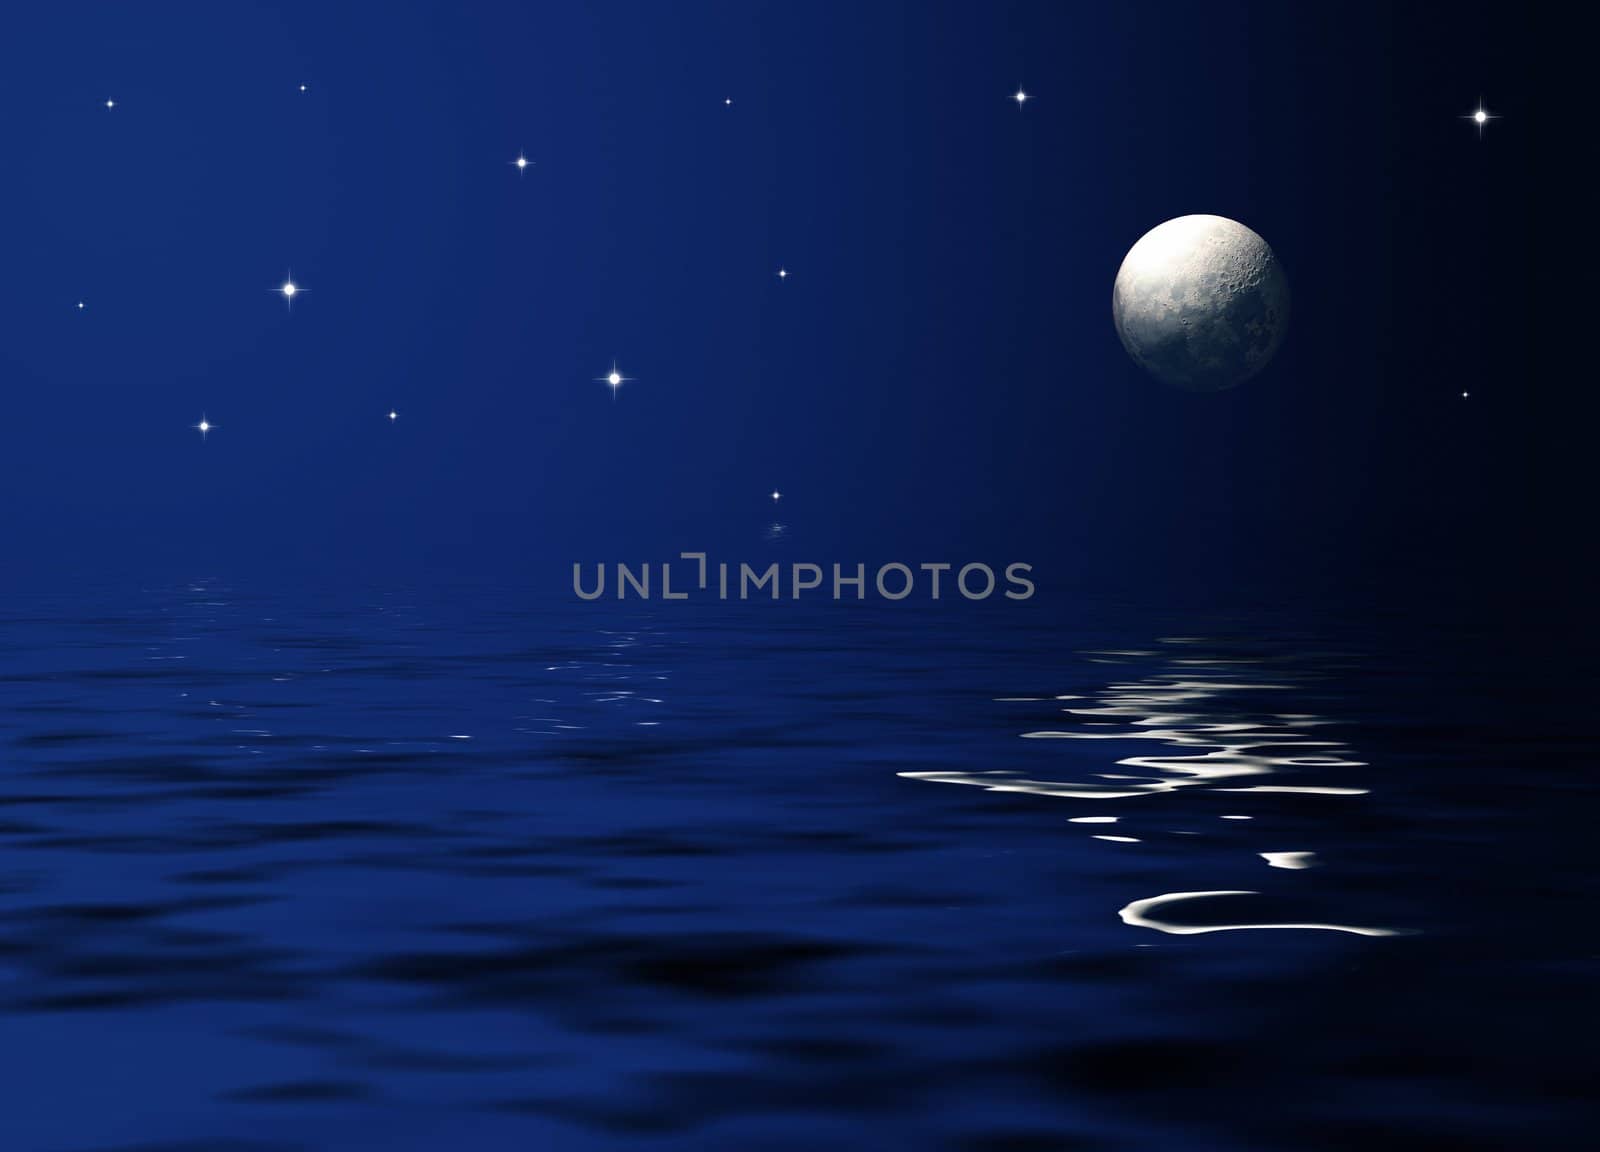 Illustration of a night scenery at sea.